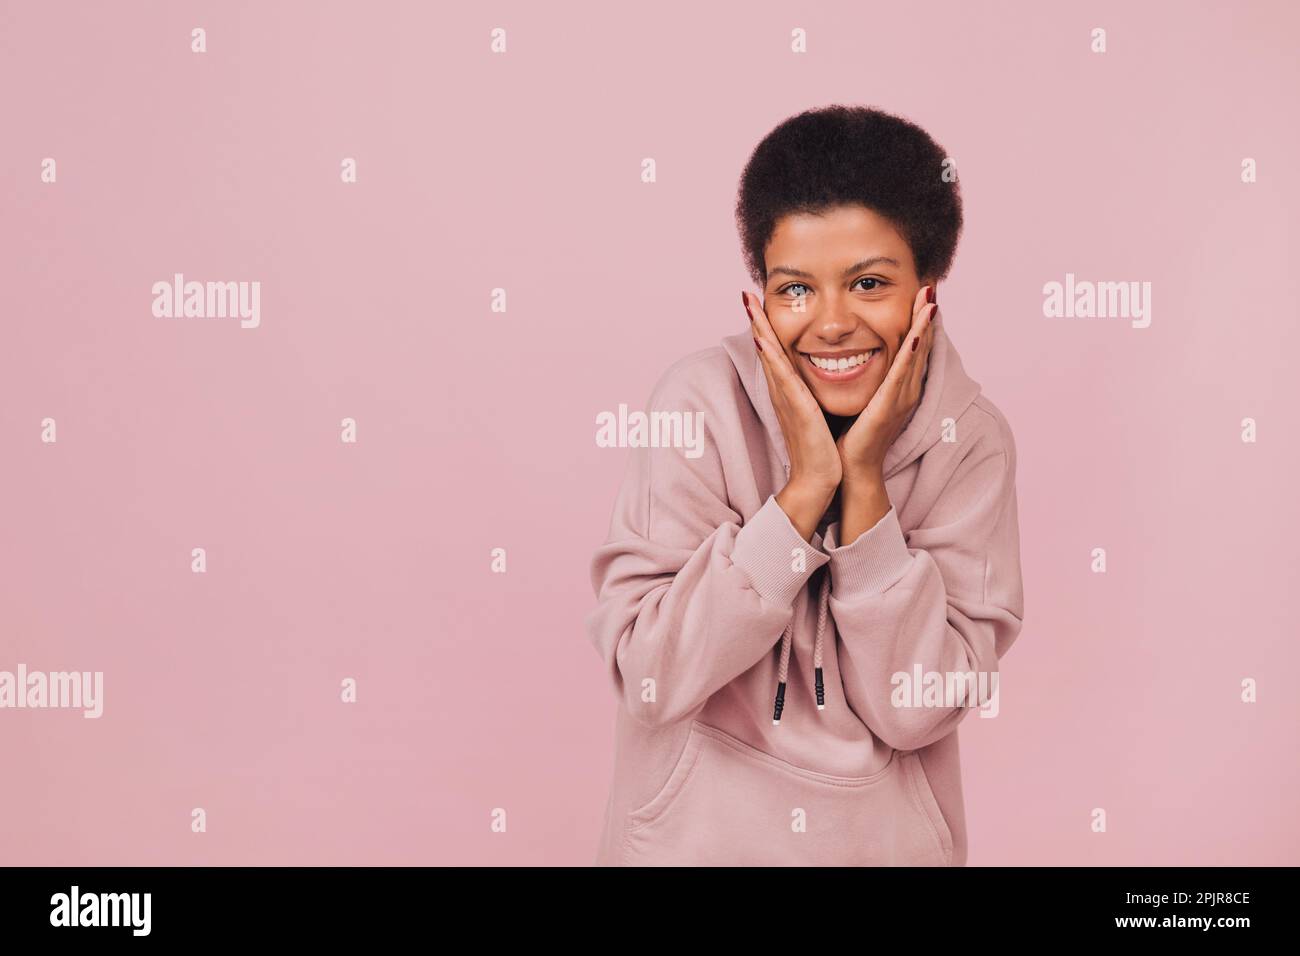 Surprised happy young black woman keeping her hands nears mouth. Pretty smiling girl wearing casual clothes posing over pink background Stock Photo